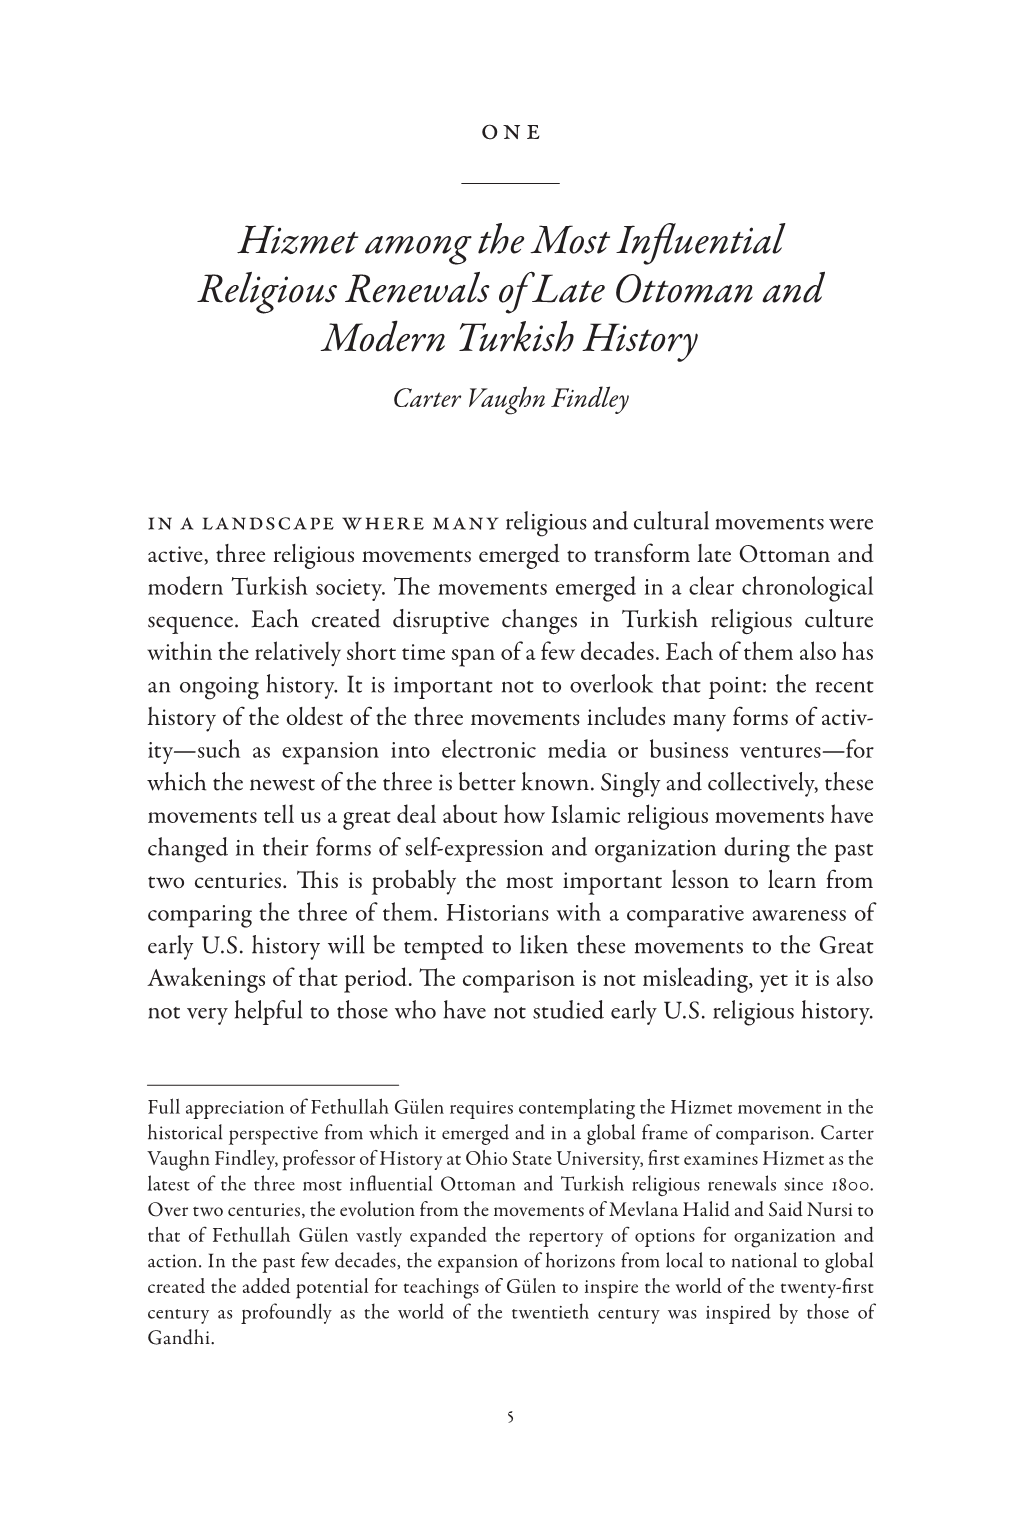 Hizmet Among the Most Influential Religious Renewals of Late Ottoman and Modern Turkish History Carter Vaughn Findley